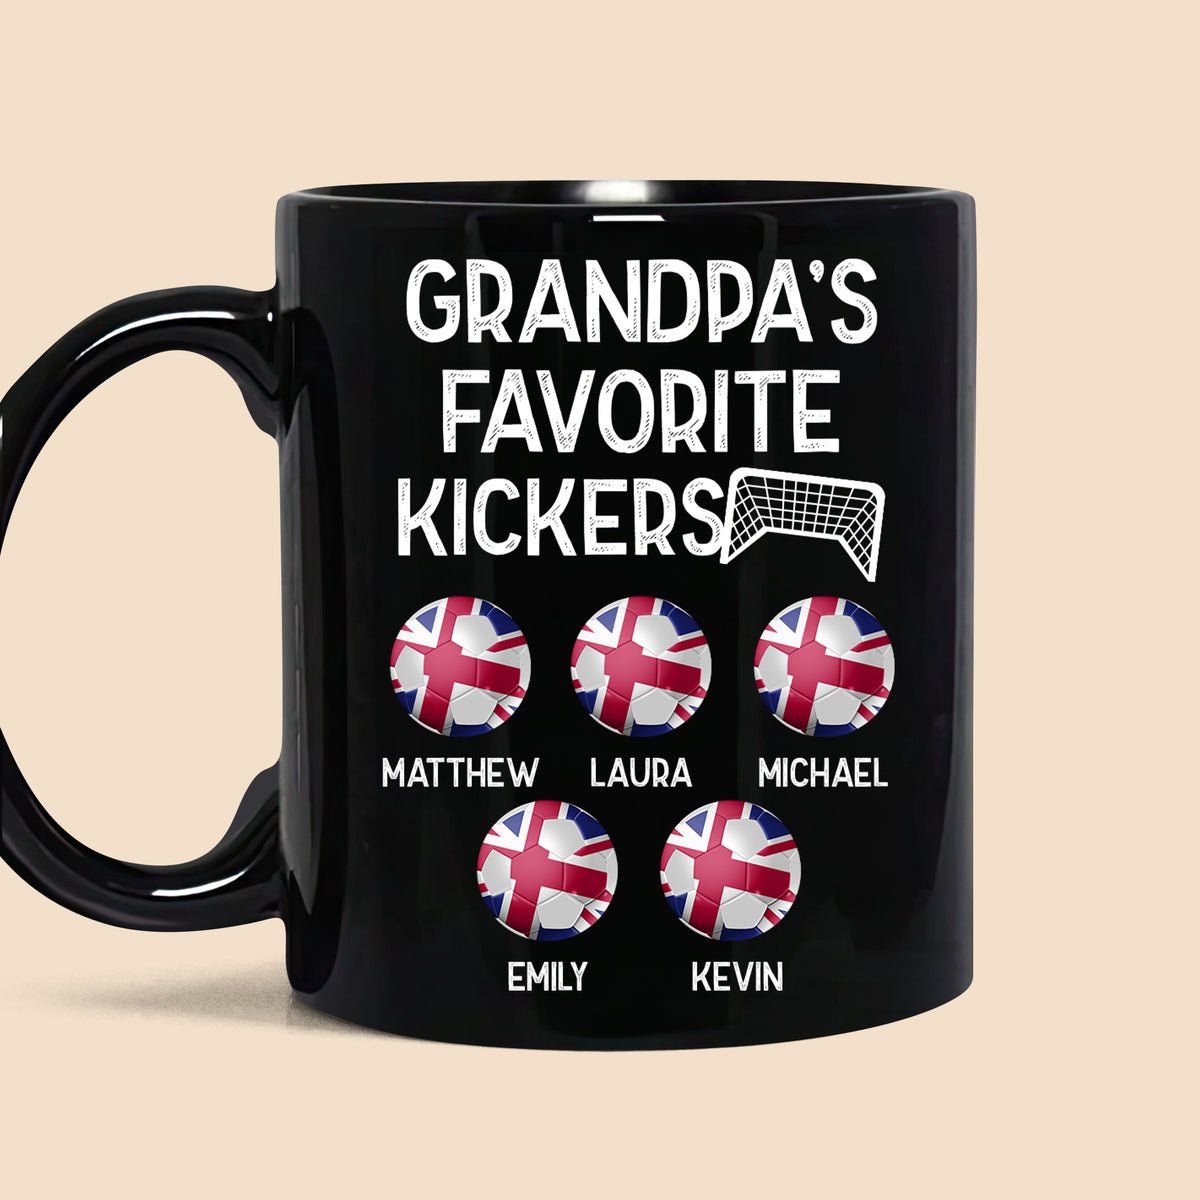 Grandpa Favorite Kickers  - Personalized Black Mug - Best Gift For Father